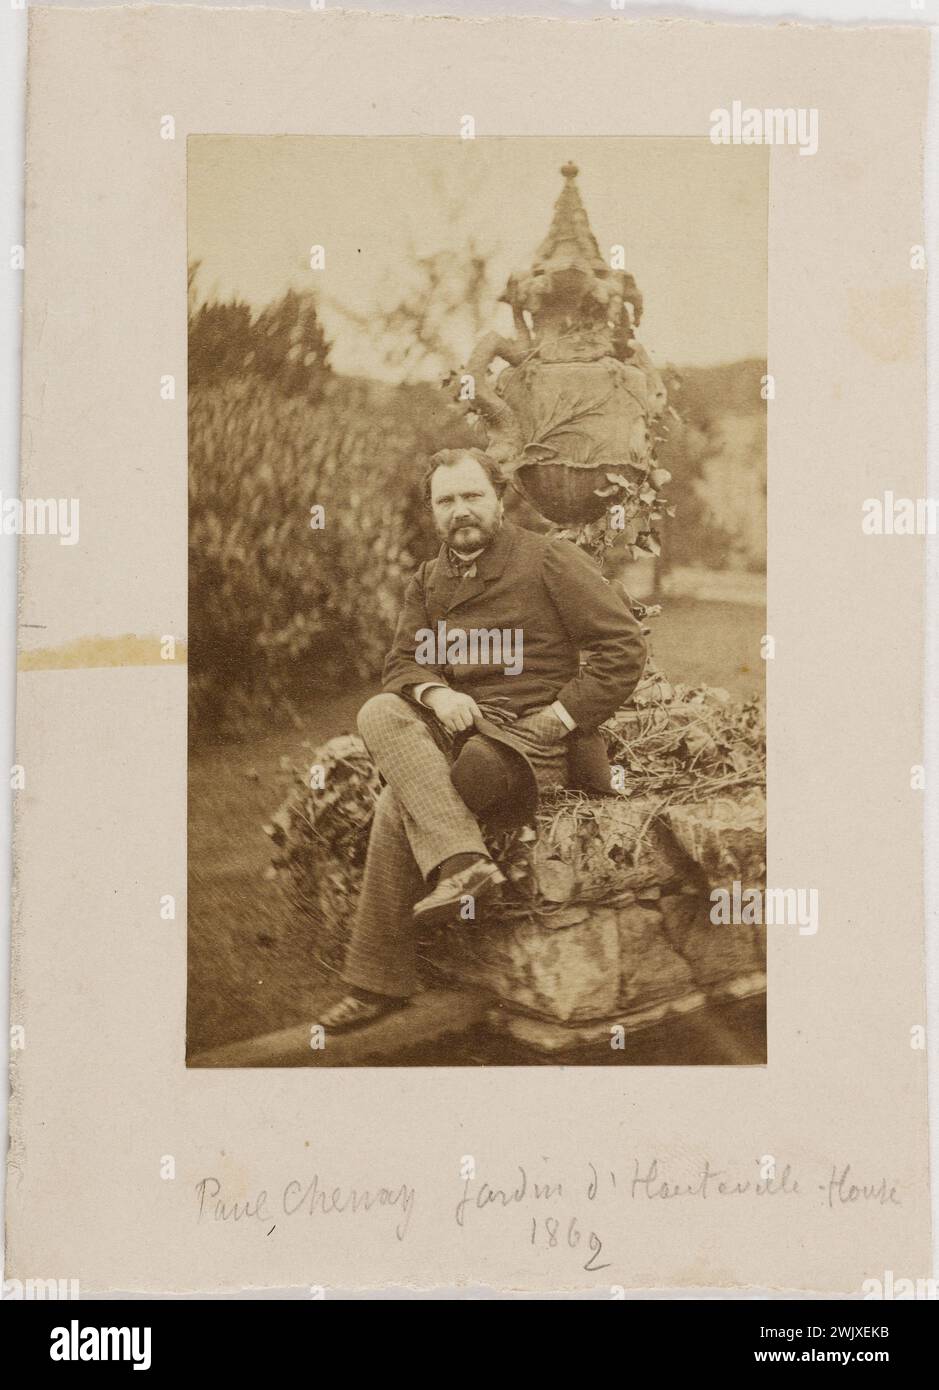 Paul Chenay seated on the edge of the snake fountain in the garden of Hauteville House '. Photography of Edmond Bacot (1814-1875). Draw on albumin paper. 1862. Paris, Maison de Victor Hugo. 101615-12 19th XIXth XIX 19th 19th 19th century Stock Photo